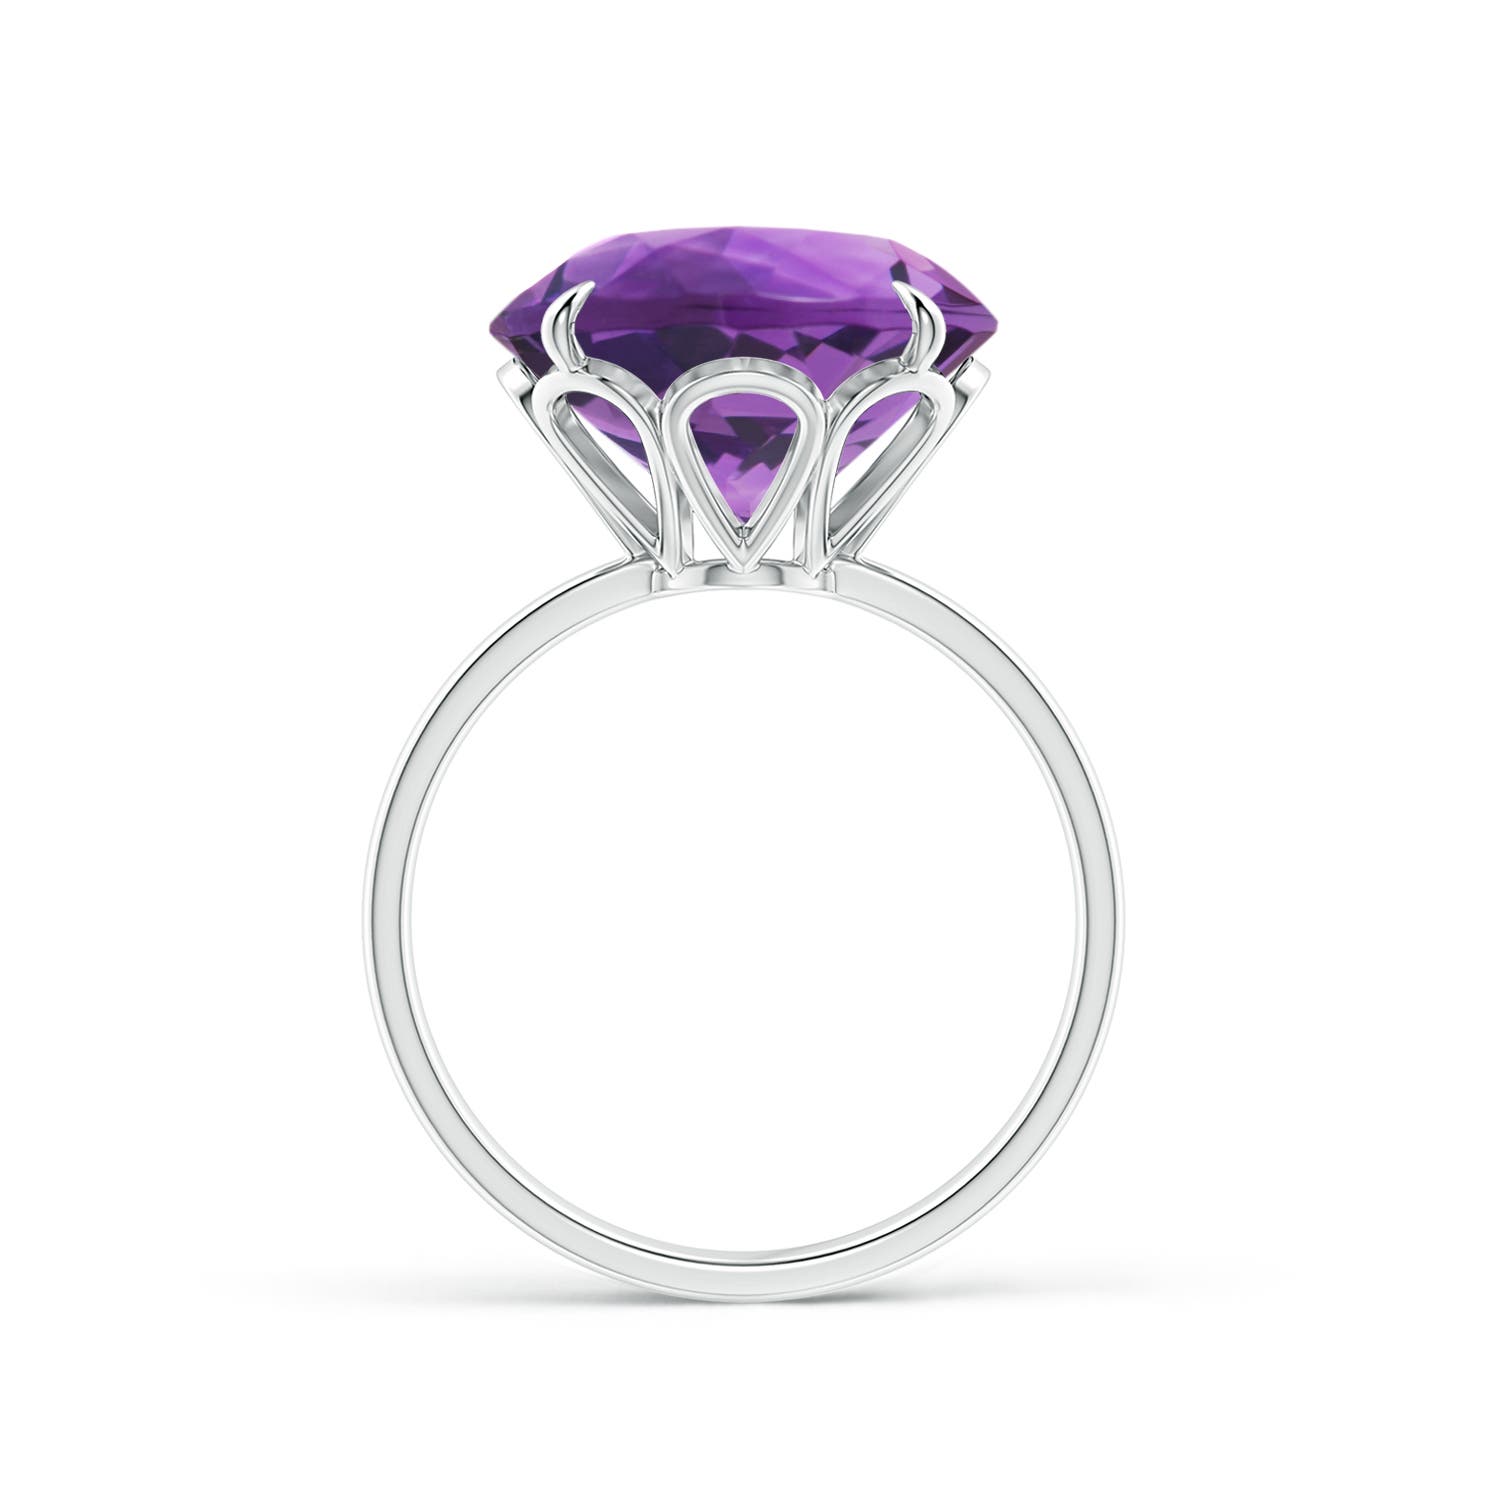 AAA- Amethyst / 7.2 CT / 14 KT White Gold